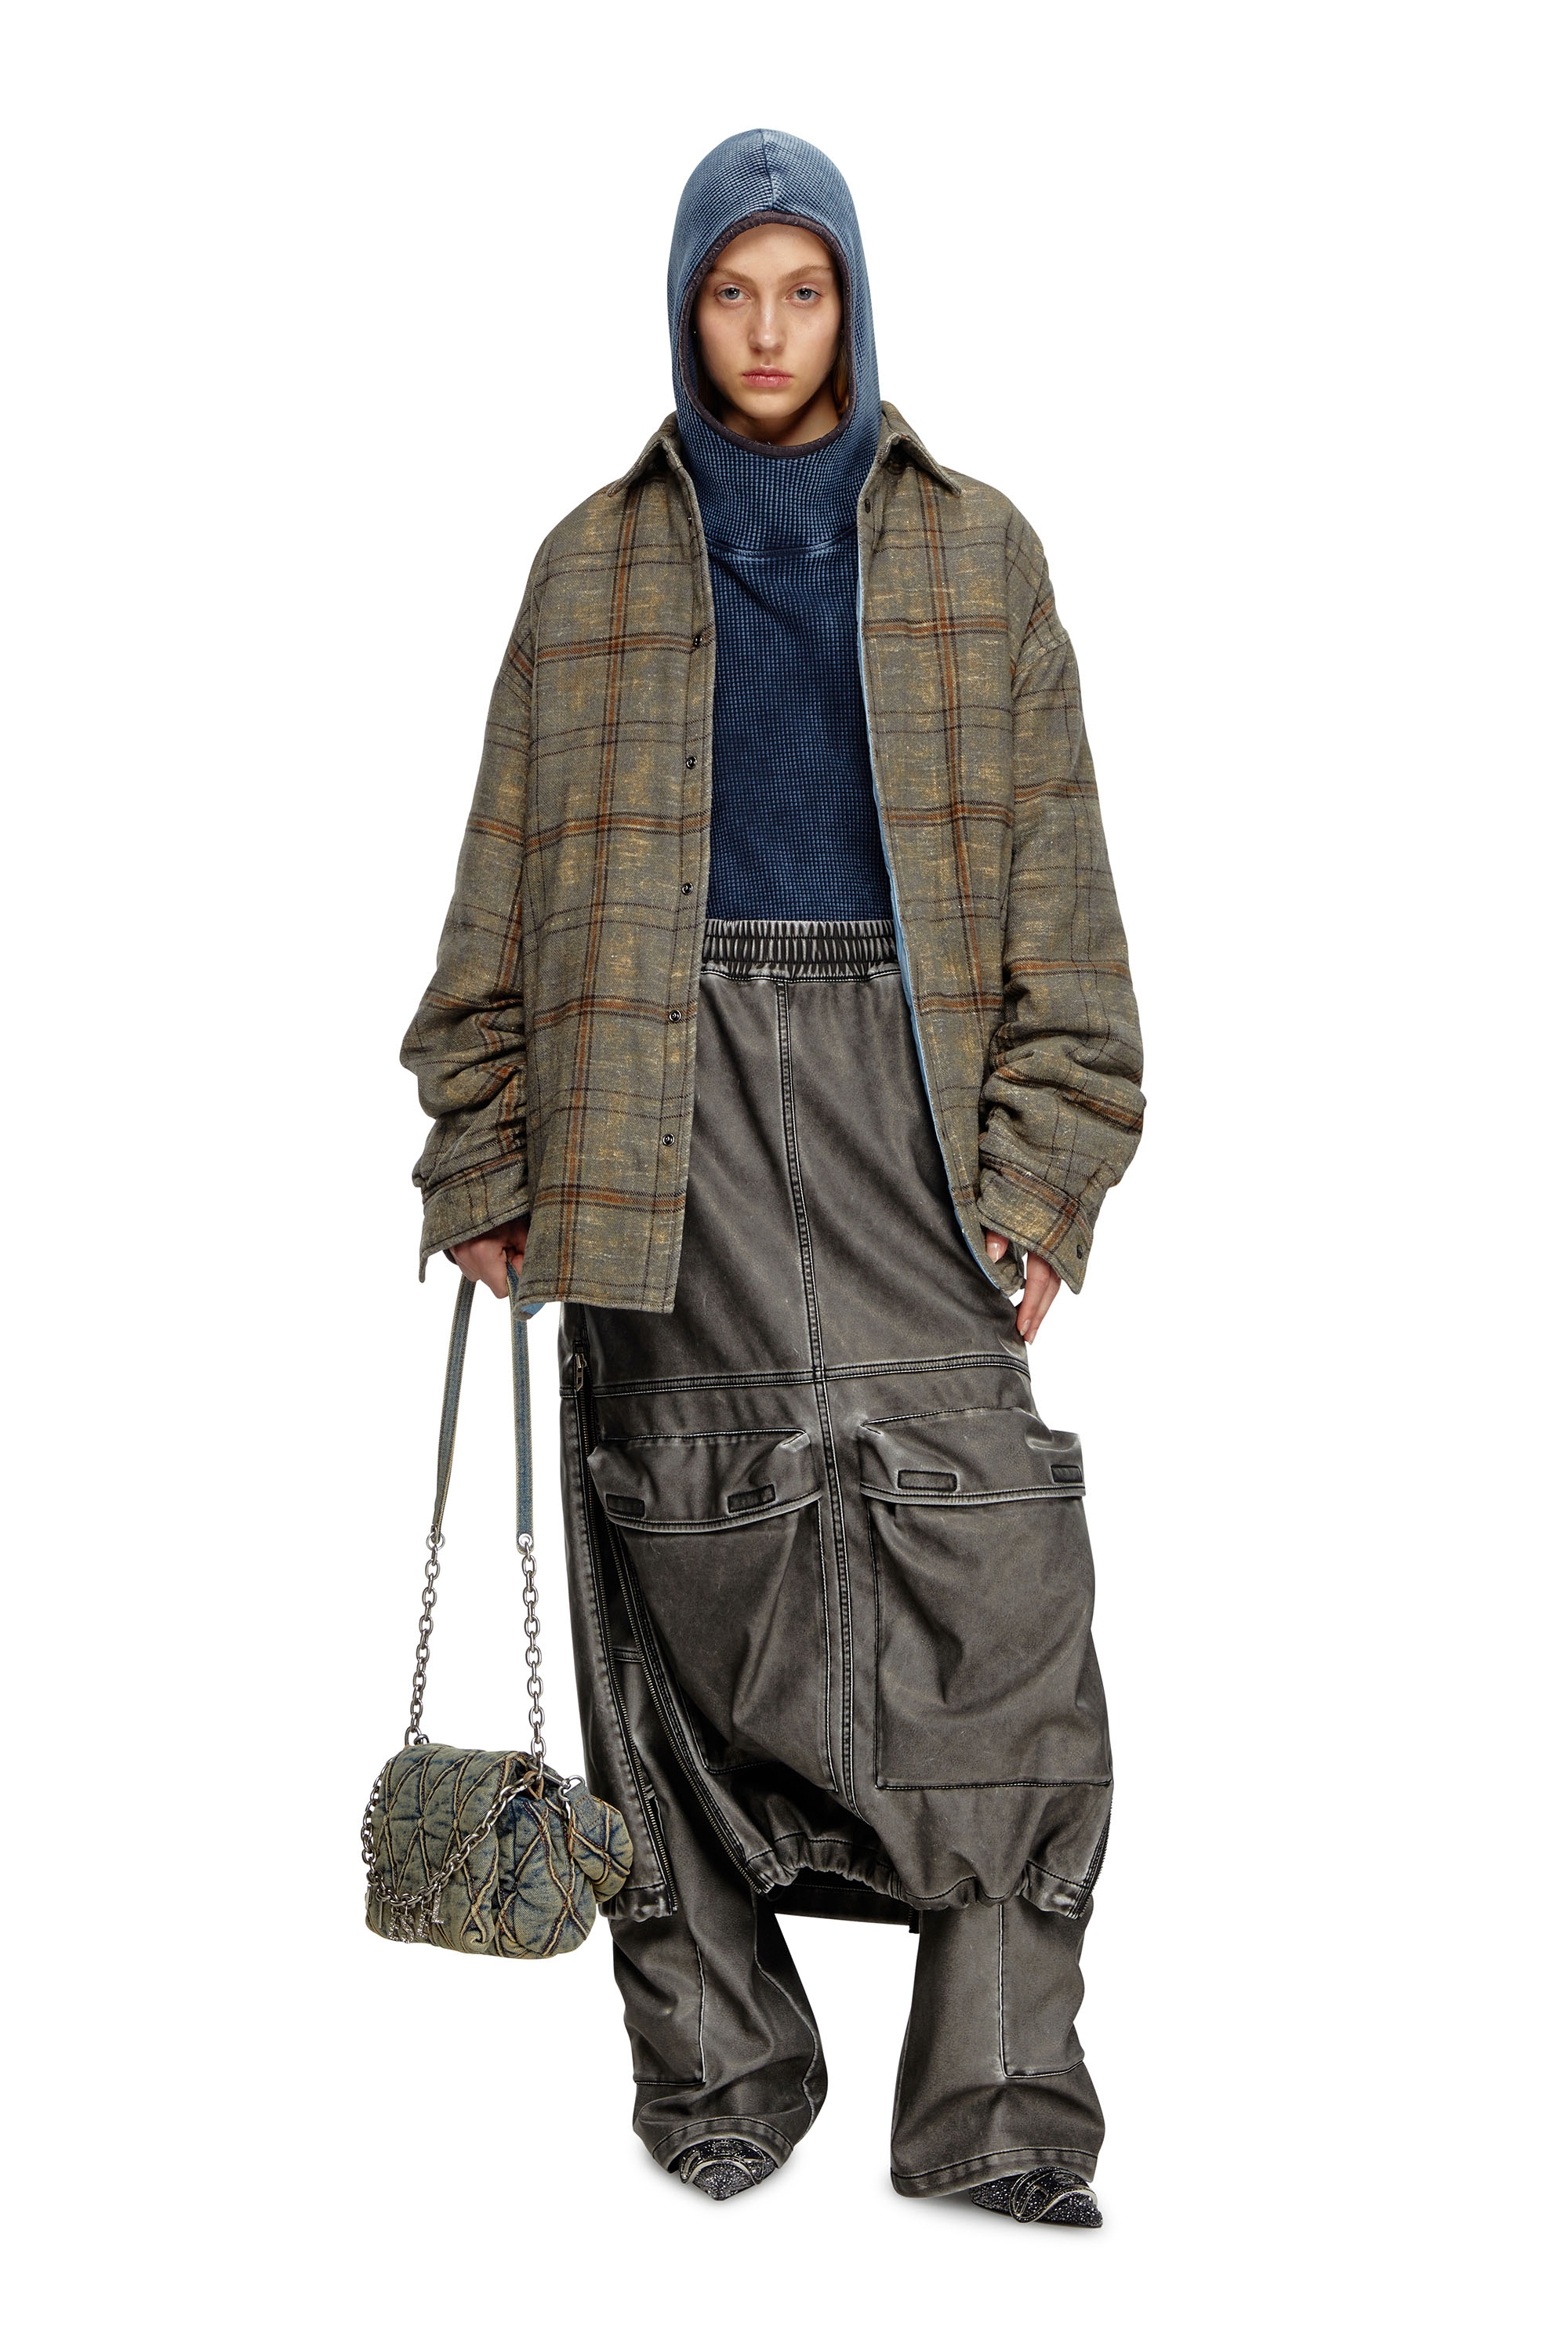 Diesel - O-DYSSEY-P1, Female Long skirt in washed tech fabric in グレー - Image 2